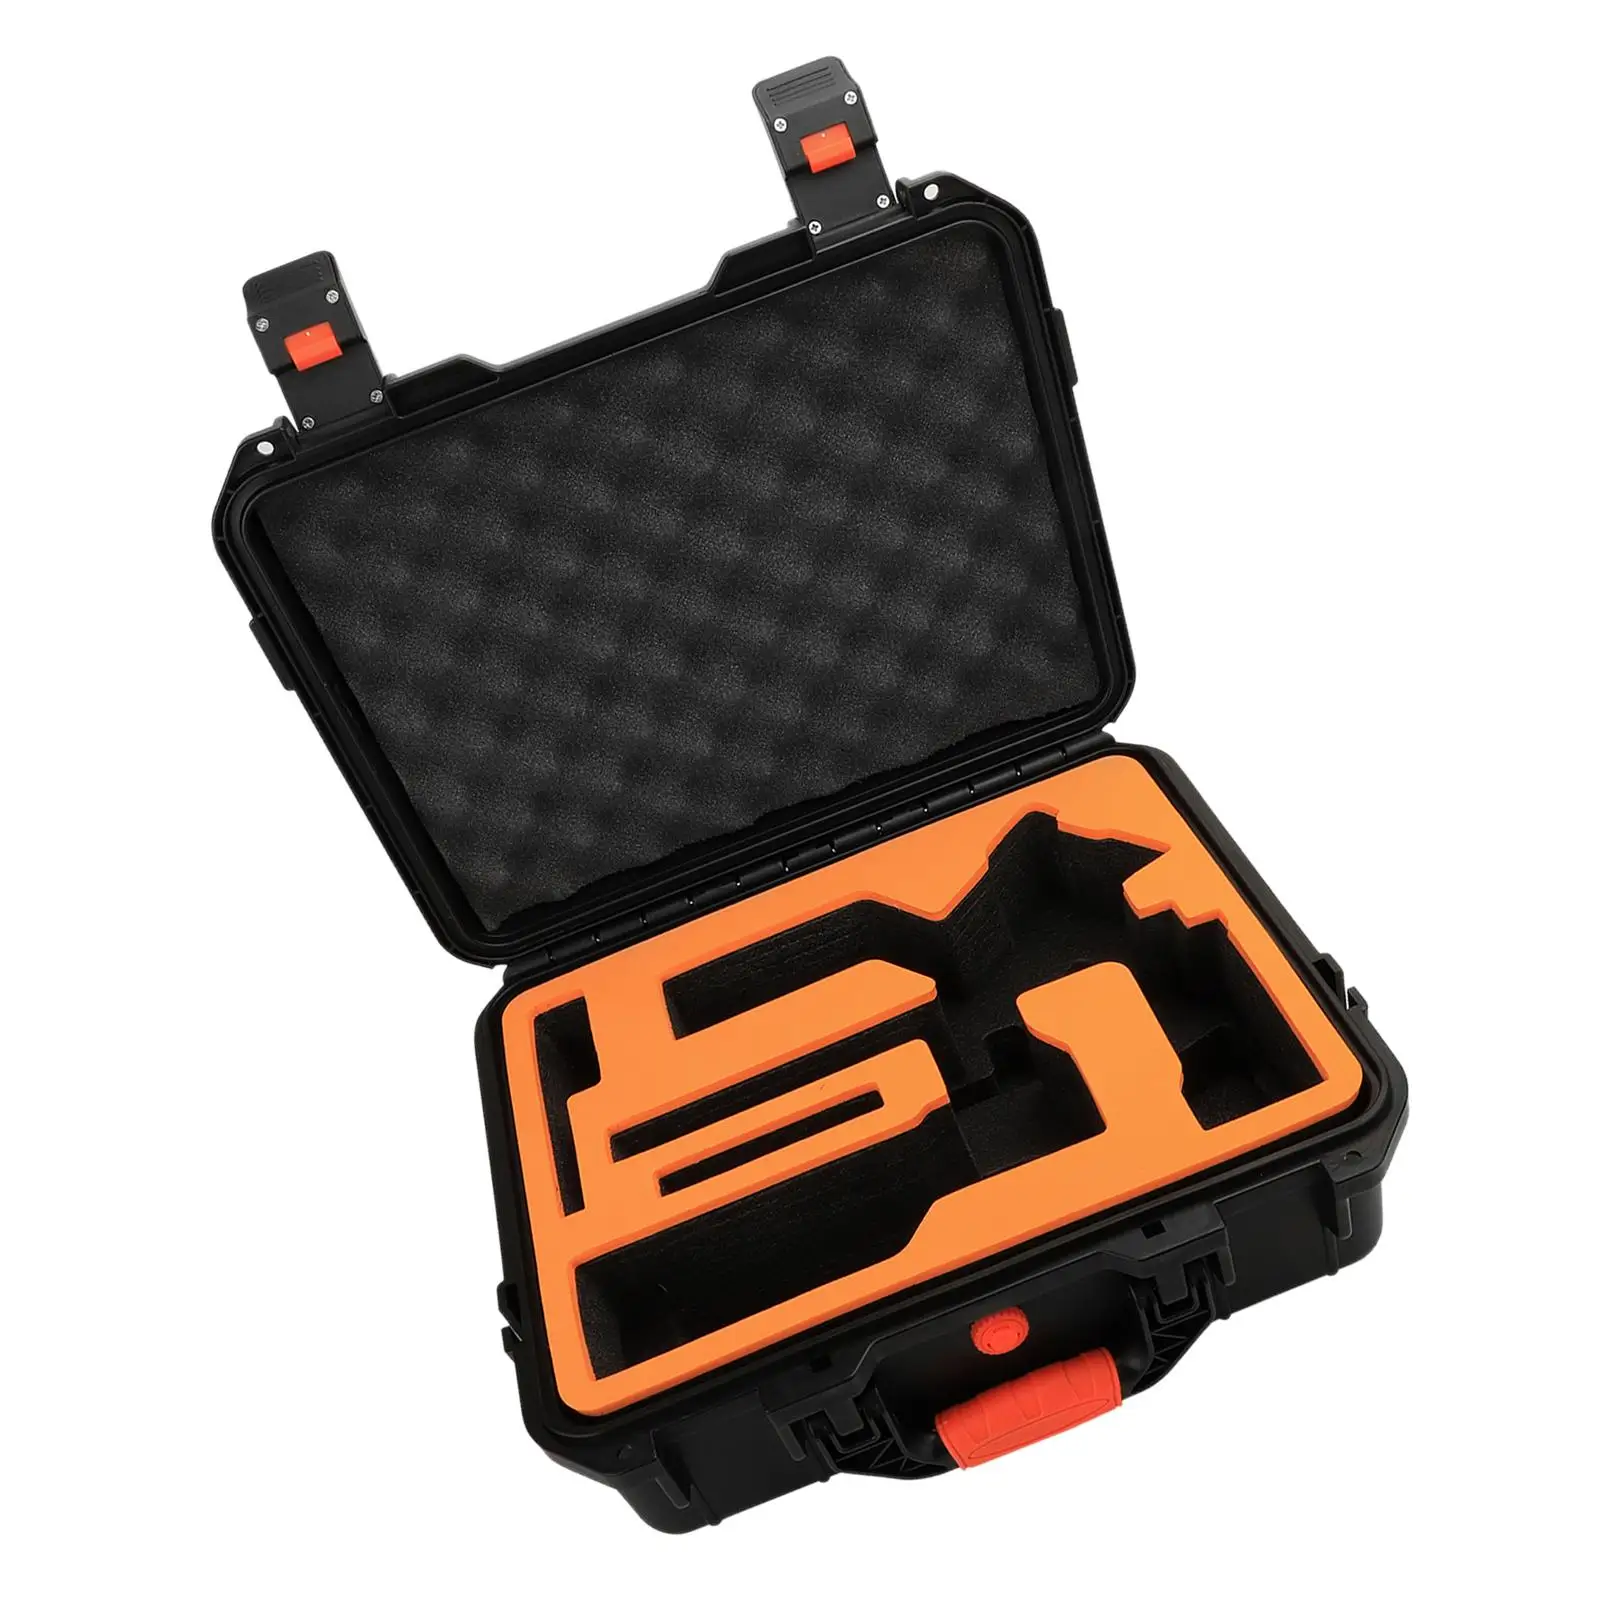 Carrying Case Lightweight Suitcase Storage Carrying Handbag with Handle Hard Storage Case for Gimbal Stabilizer Accessories